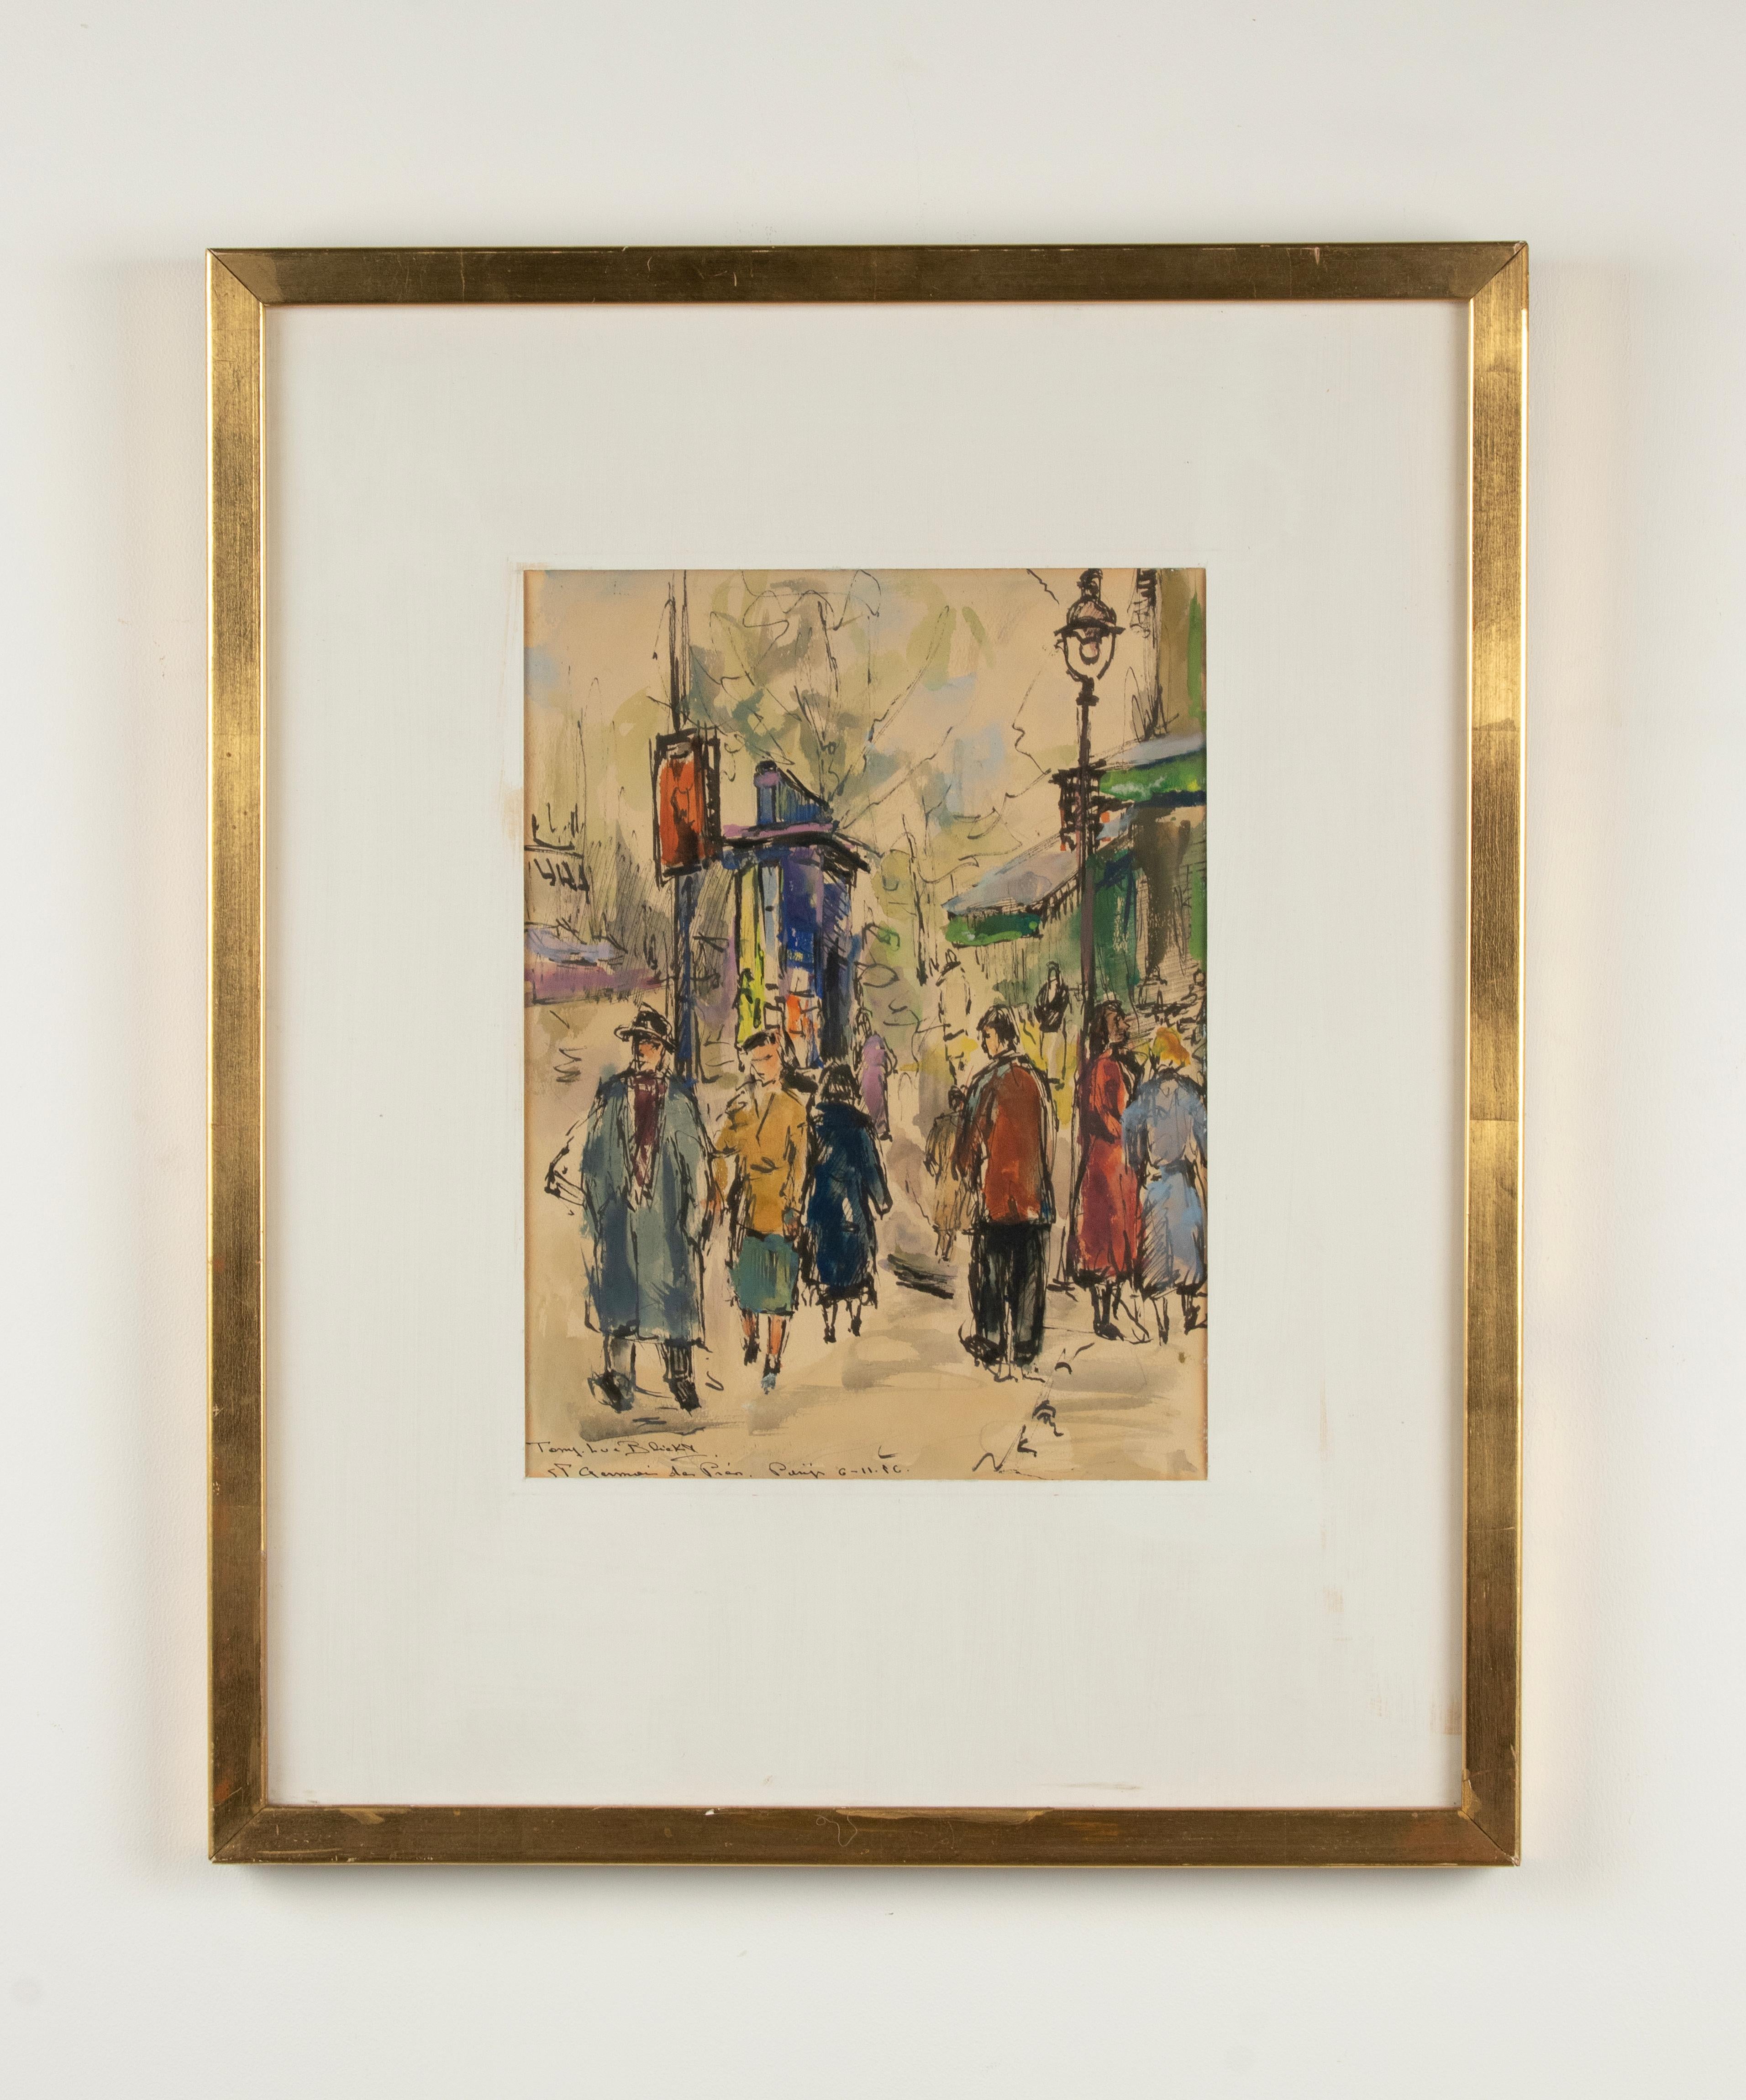 A nice mid-century modern expressionist watercolor, made and signed by Tony-Luc Blickx. Painted at the Saint-Germain-des-Prés area in Paris, the heart of the Latin quarter.
Signed and dated left under, 1956. Tony-Luc Blickx (Belgium, 1926 -